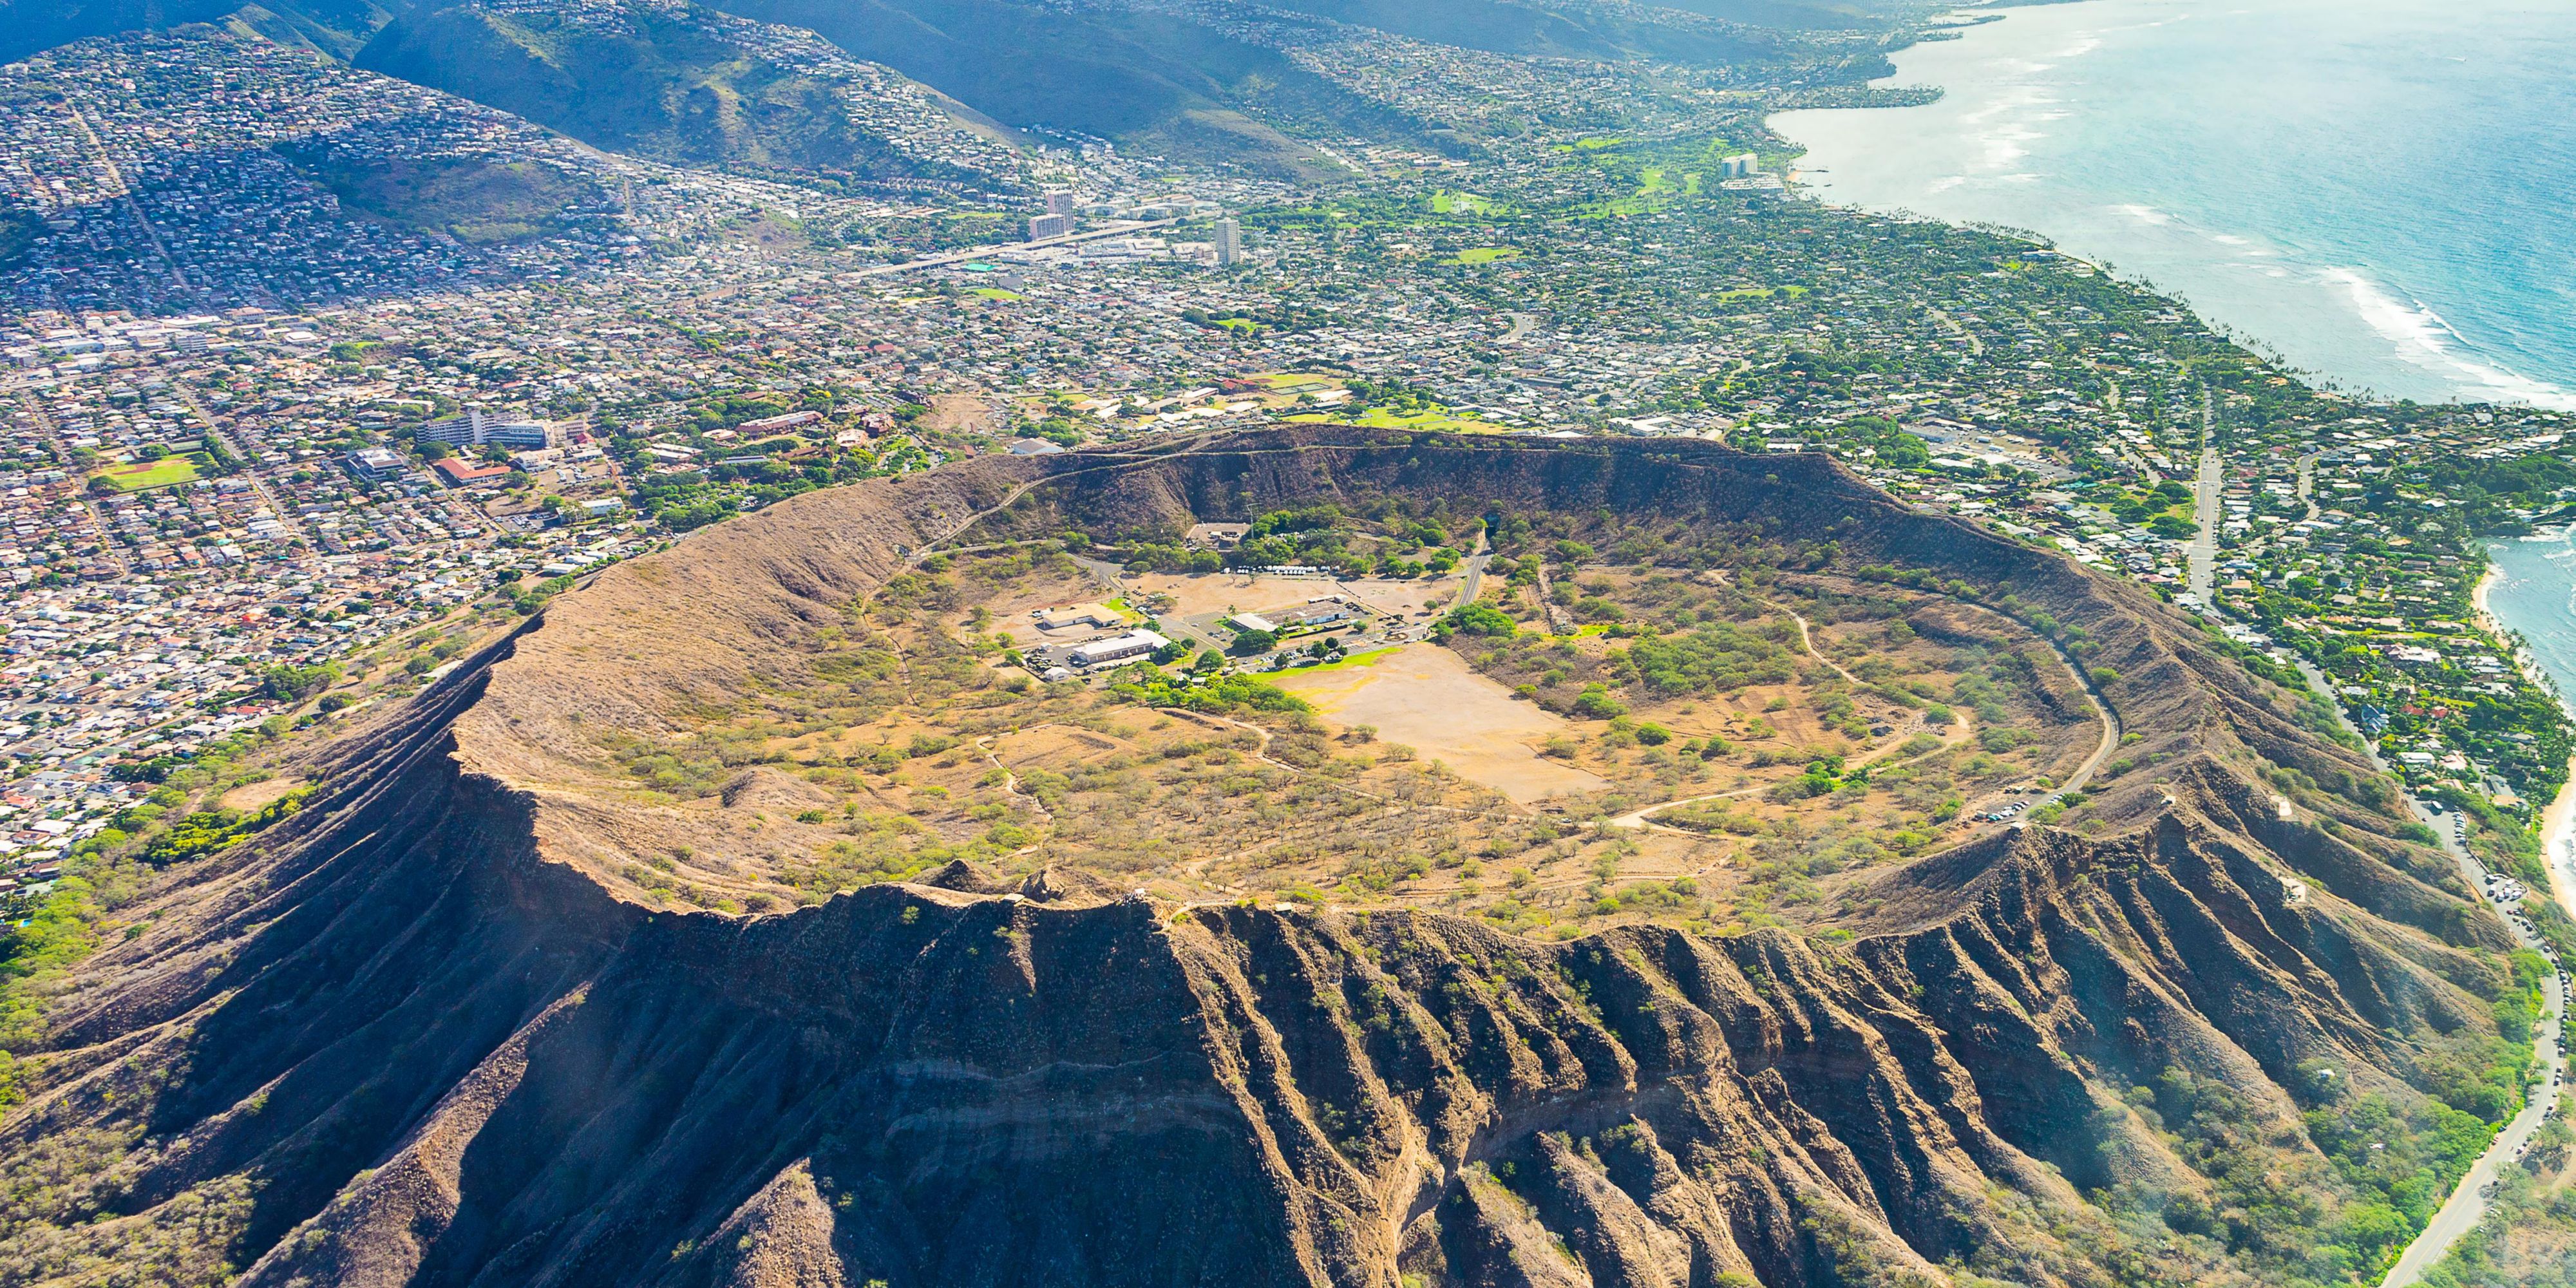 Also known as Le'ahi, this crater of an extinct volcano got its name when Western explorers mistook calcite crystals they found there for diamonds. Framing the fabric of the island, the crater is riddled with a tracery of vents and volcanic remnants.